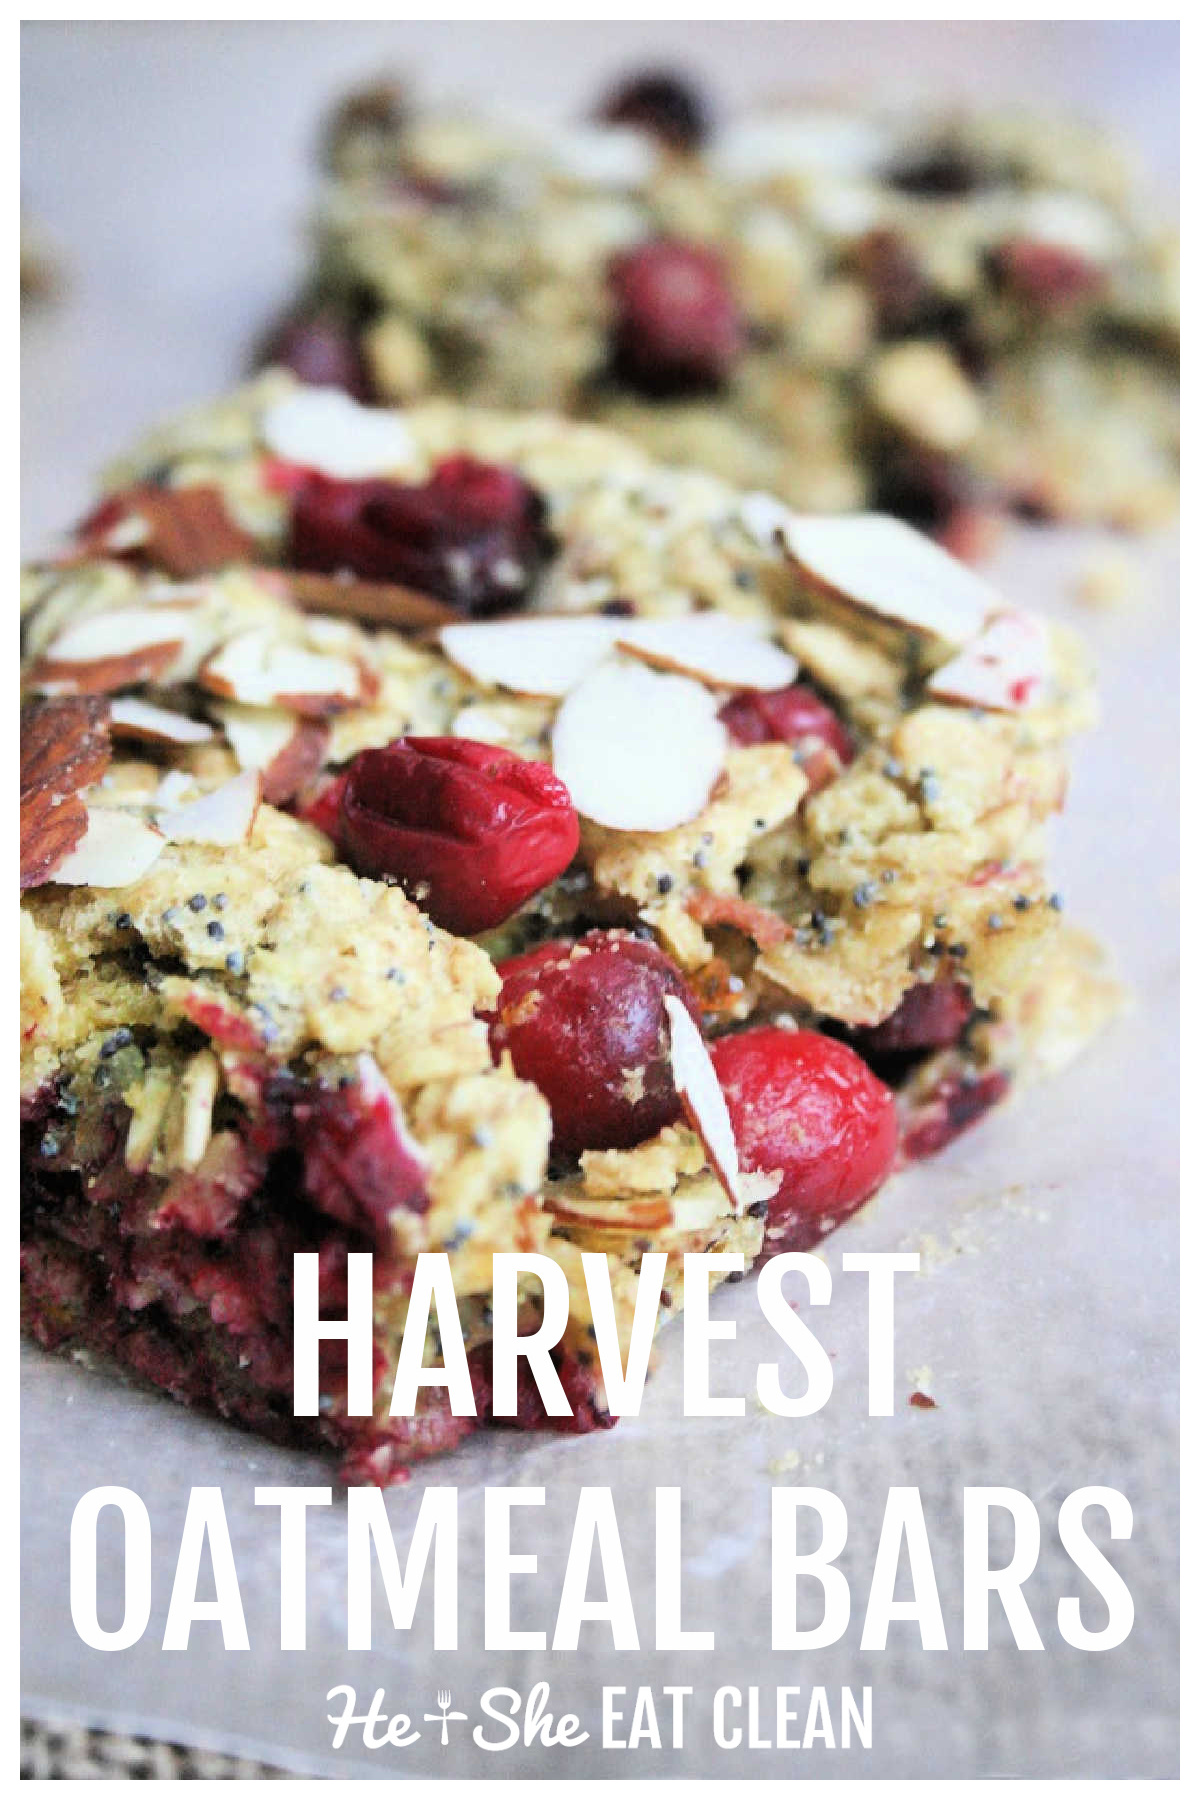 Harvest oatmeal bars with cranberries and almonds